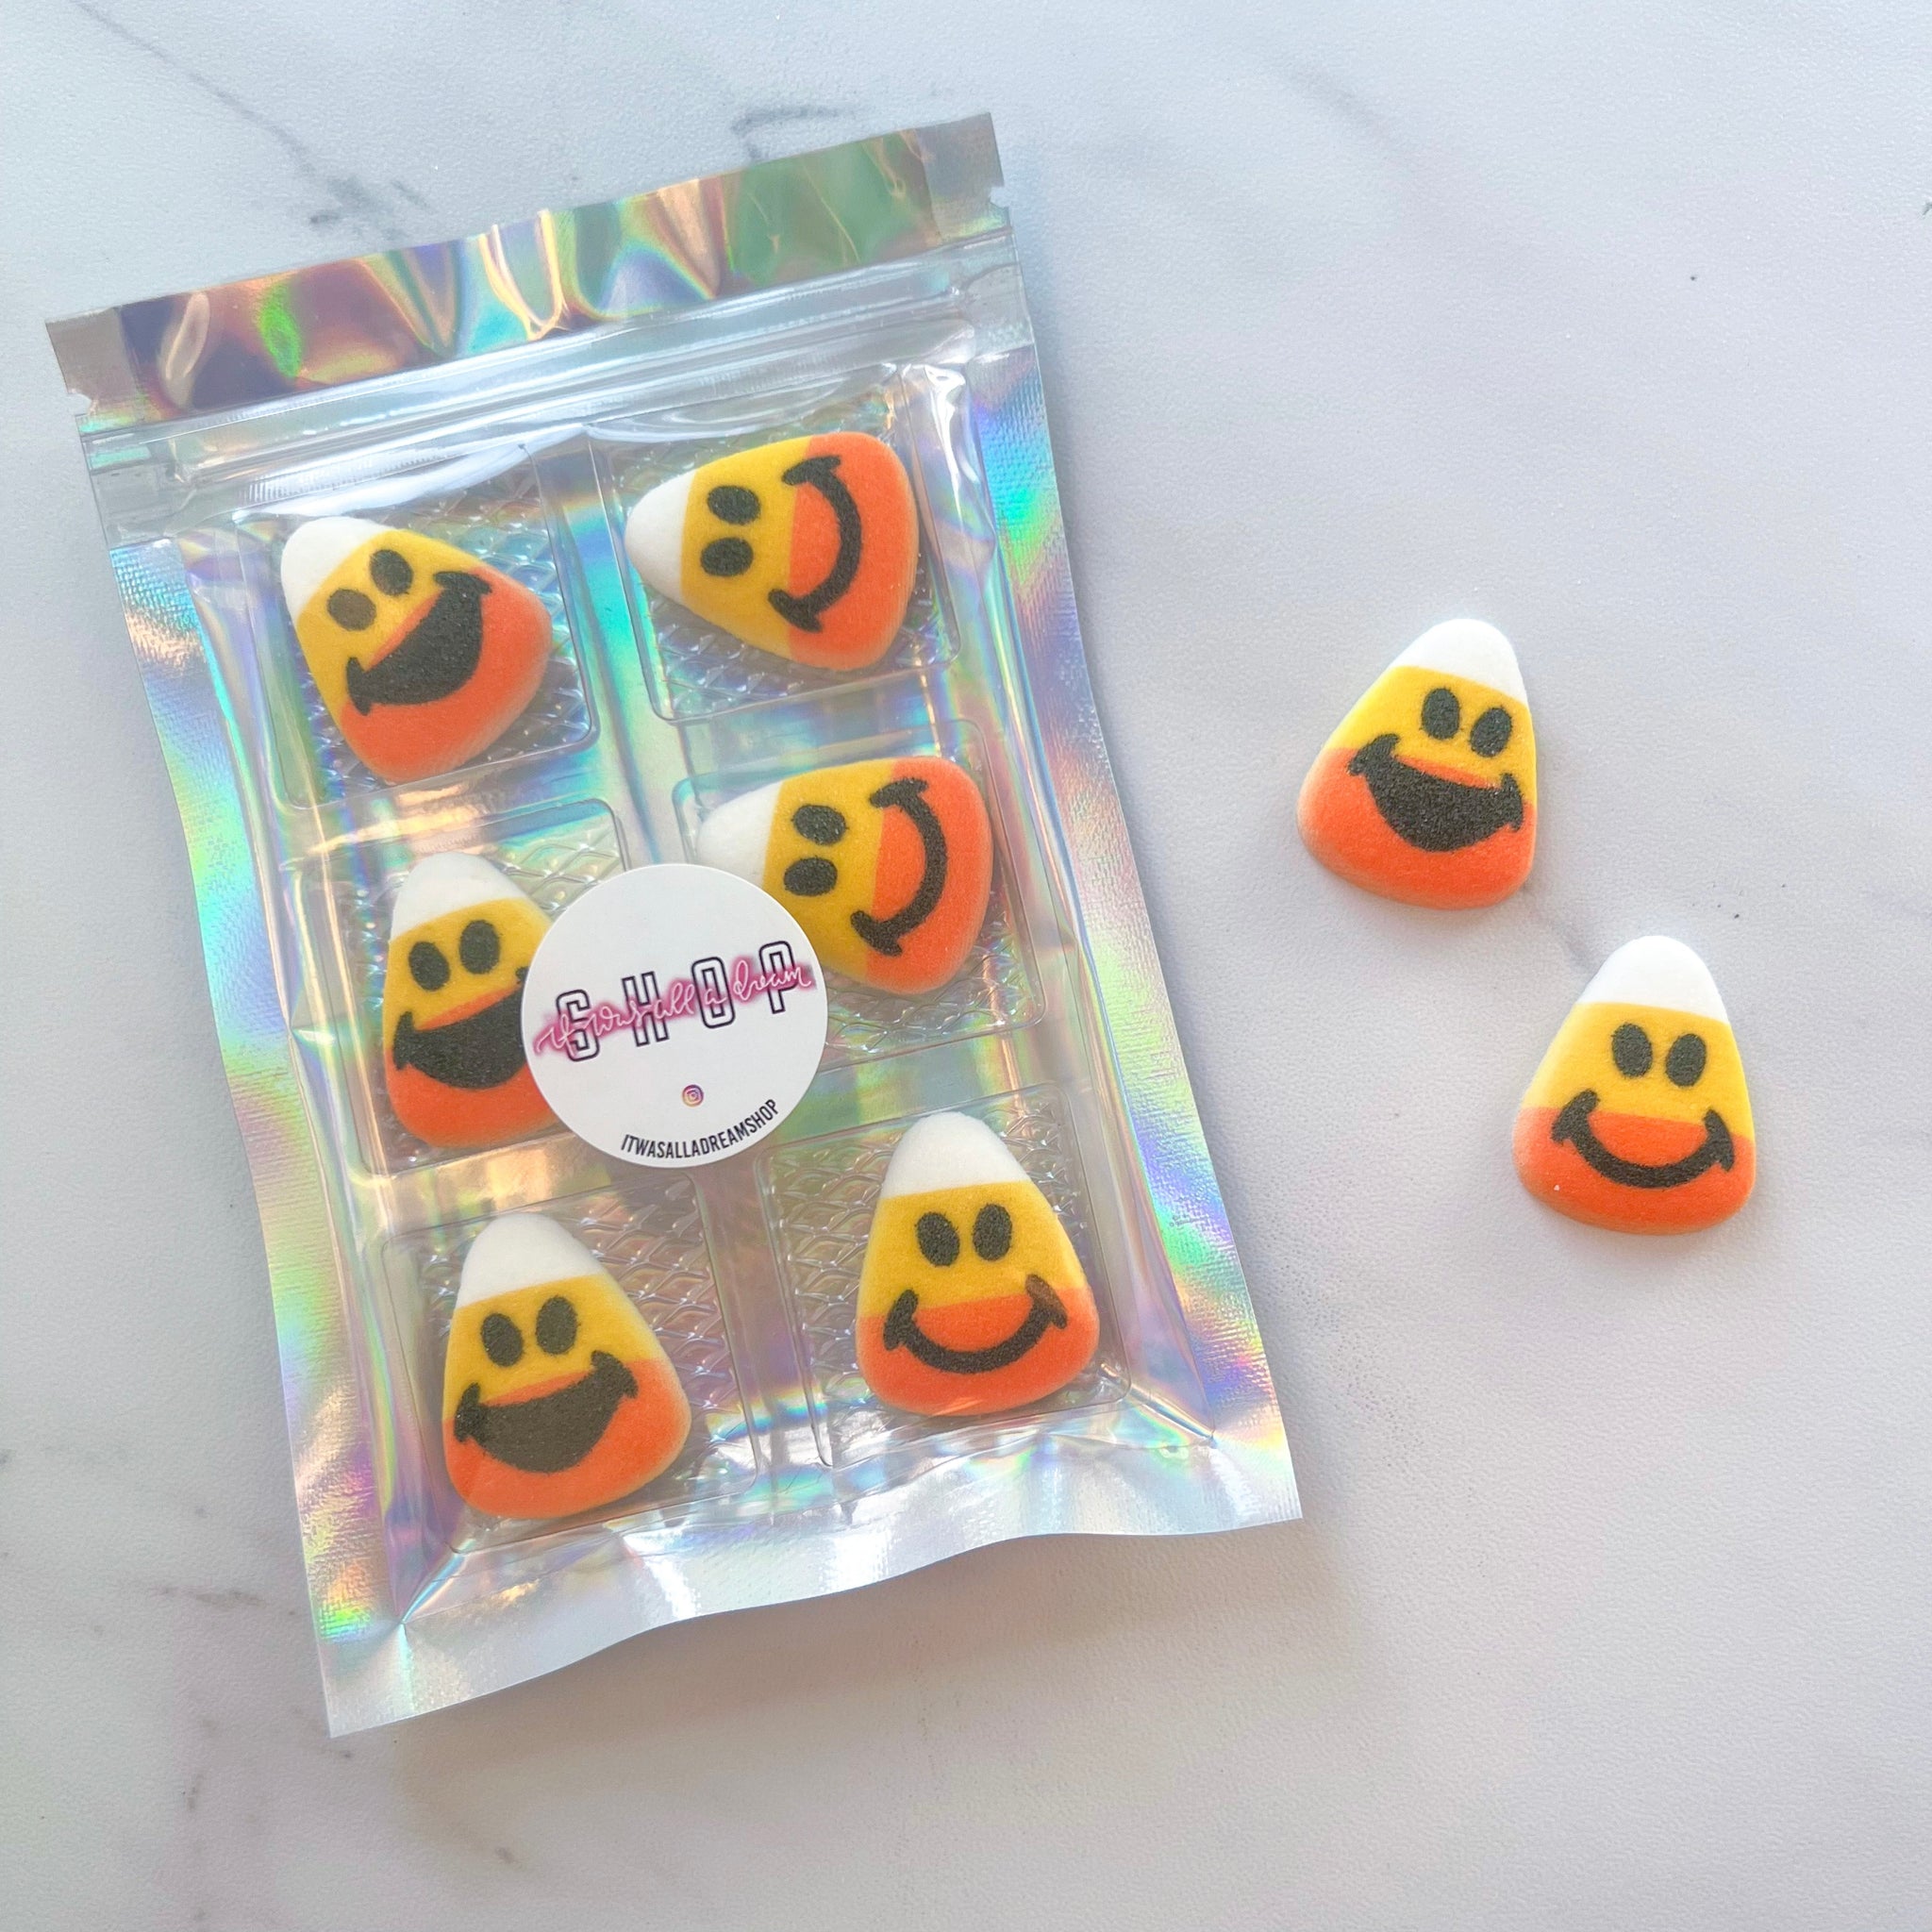 CANDY CORN FACES EDIBLE DECORATIONS